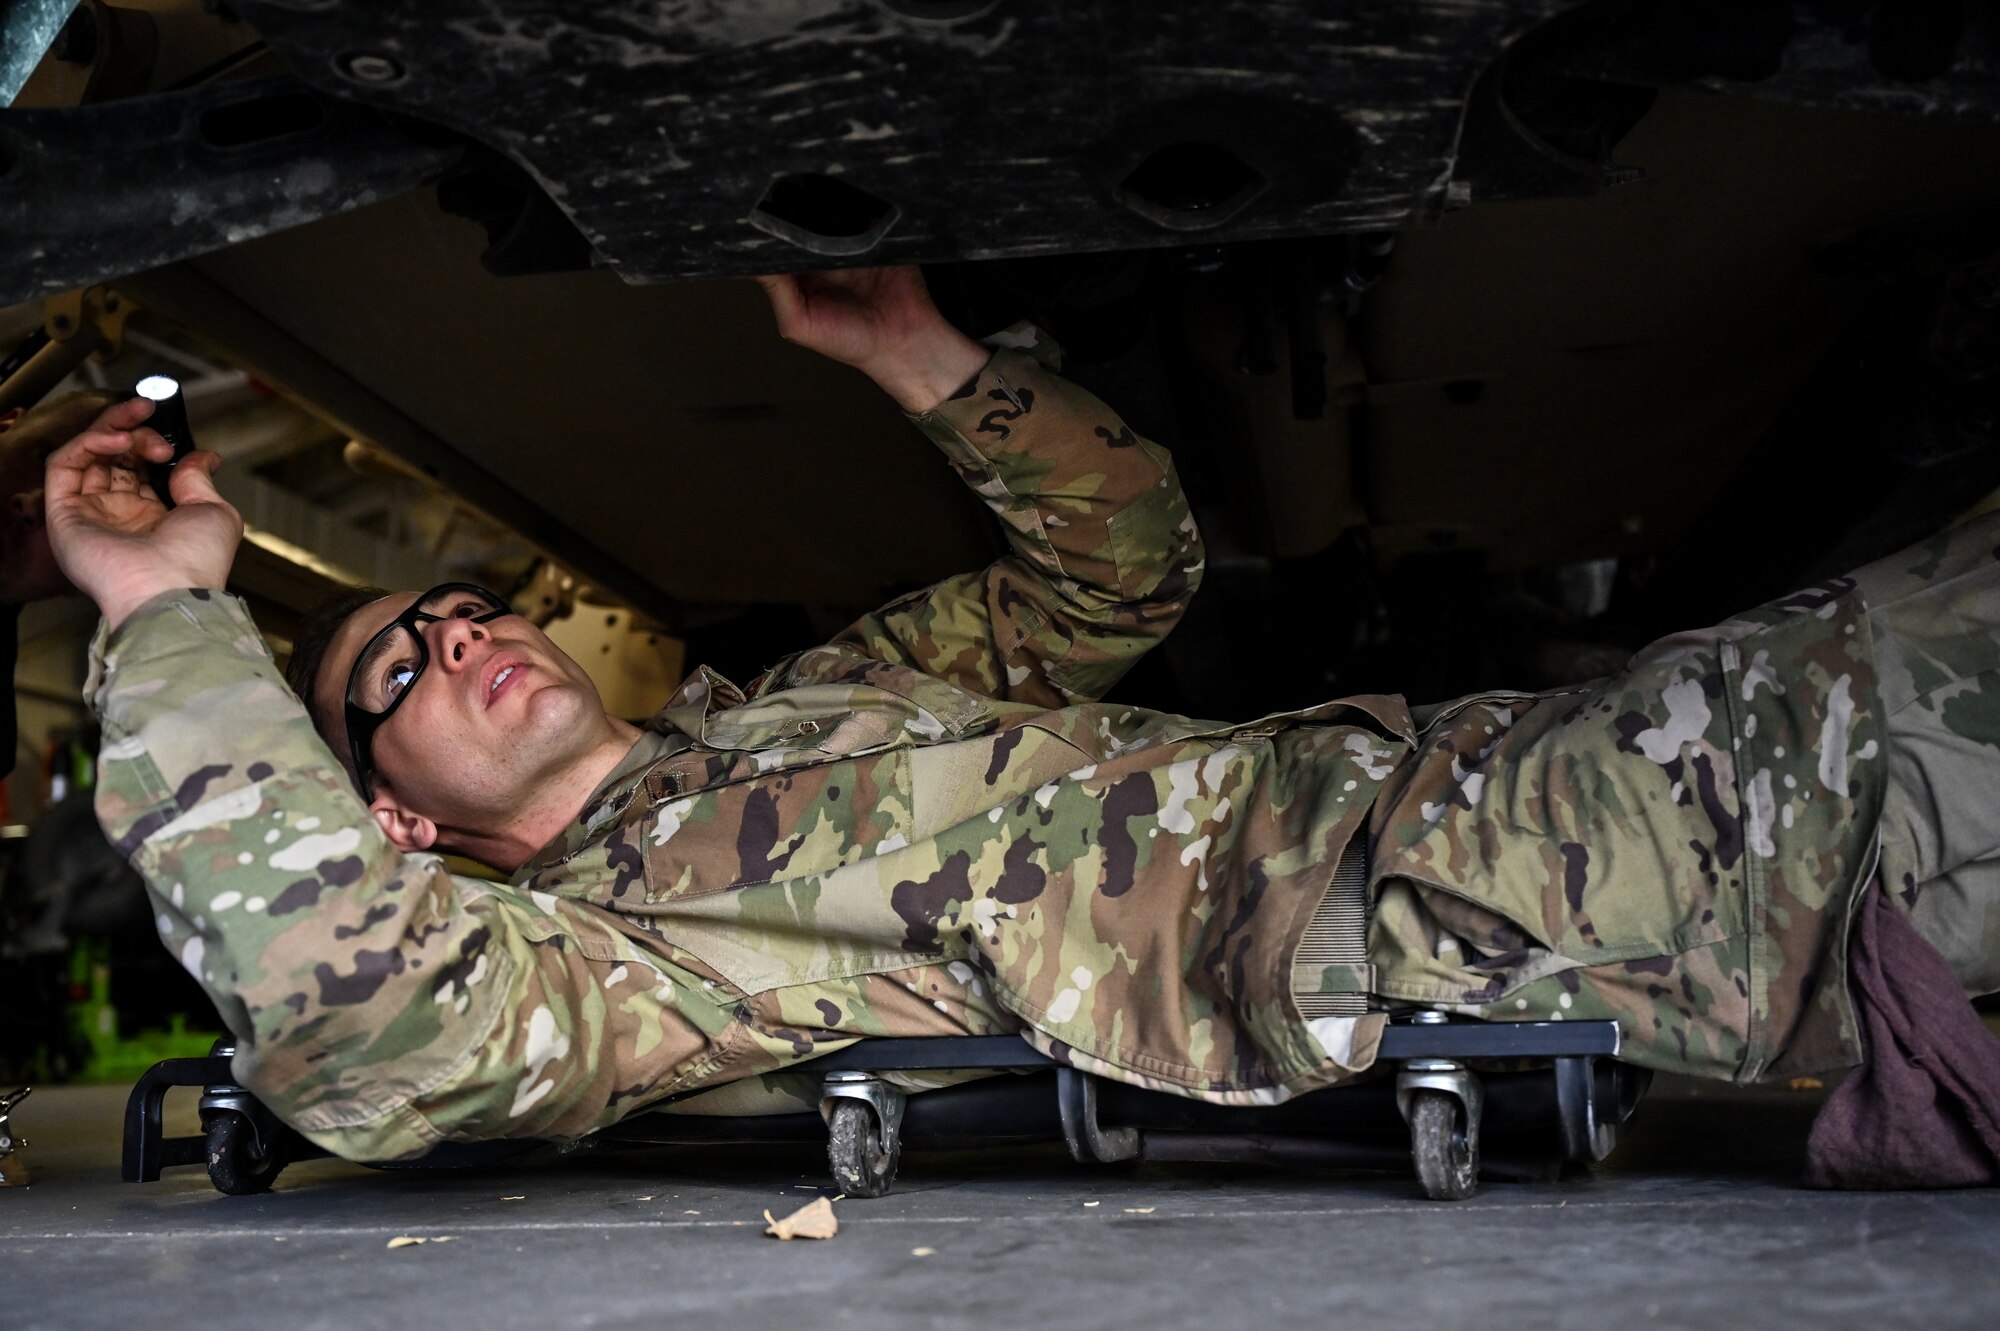 Senior Airman Korey Sarantopoulos, 90th Logistics Readiness Squadron vehicle maintenance journeyman, inspects the undercarriage to check the electrical, brake, fuel, cooling and other systems for serviceability as part of a Joint Light Tactical Vehicle limited technical inspection at F.E. Warren Air Force Base, Wyoming, Oct 25, 2022. The 90 LRS is tasked with preparing the next generation of security forces vehicles sent to protect the 90th Missile Wing's ICBM system as part of Air Force Global Strike Command’s priority to modernize. (U.S. Air Force photo by Joseph Coslett)